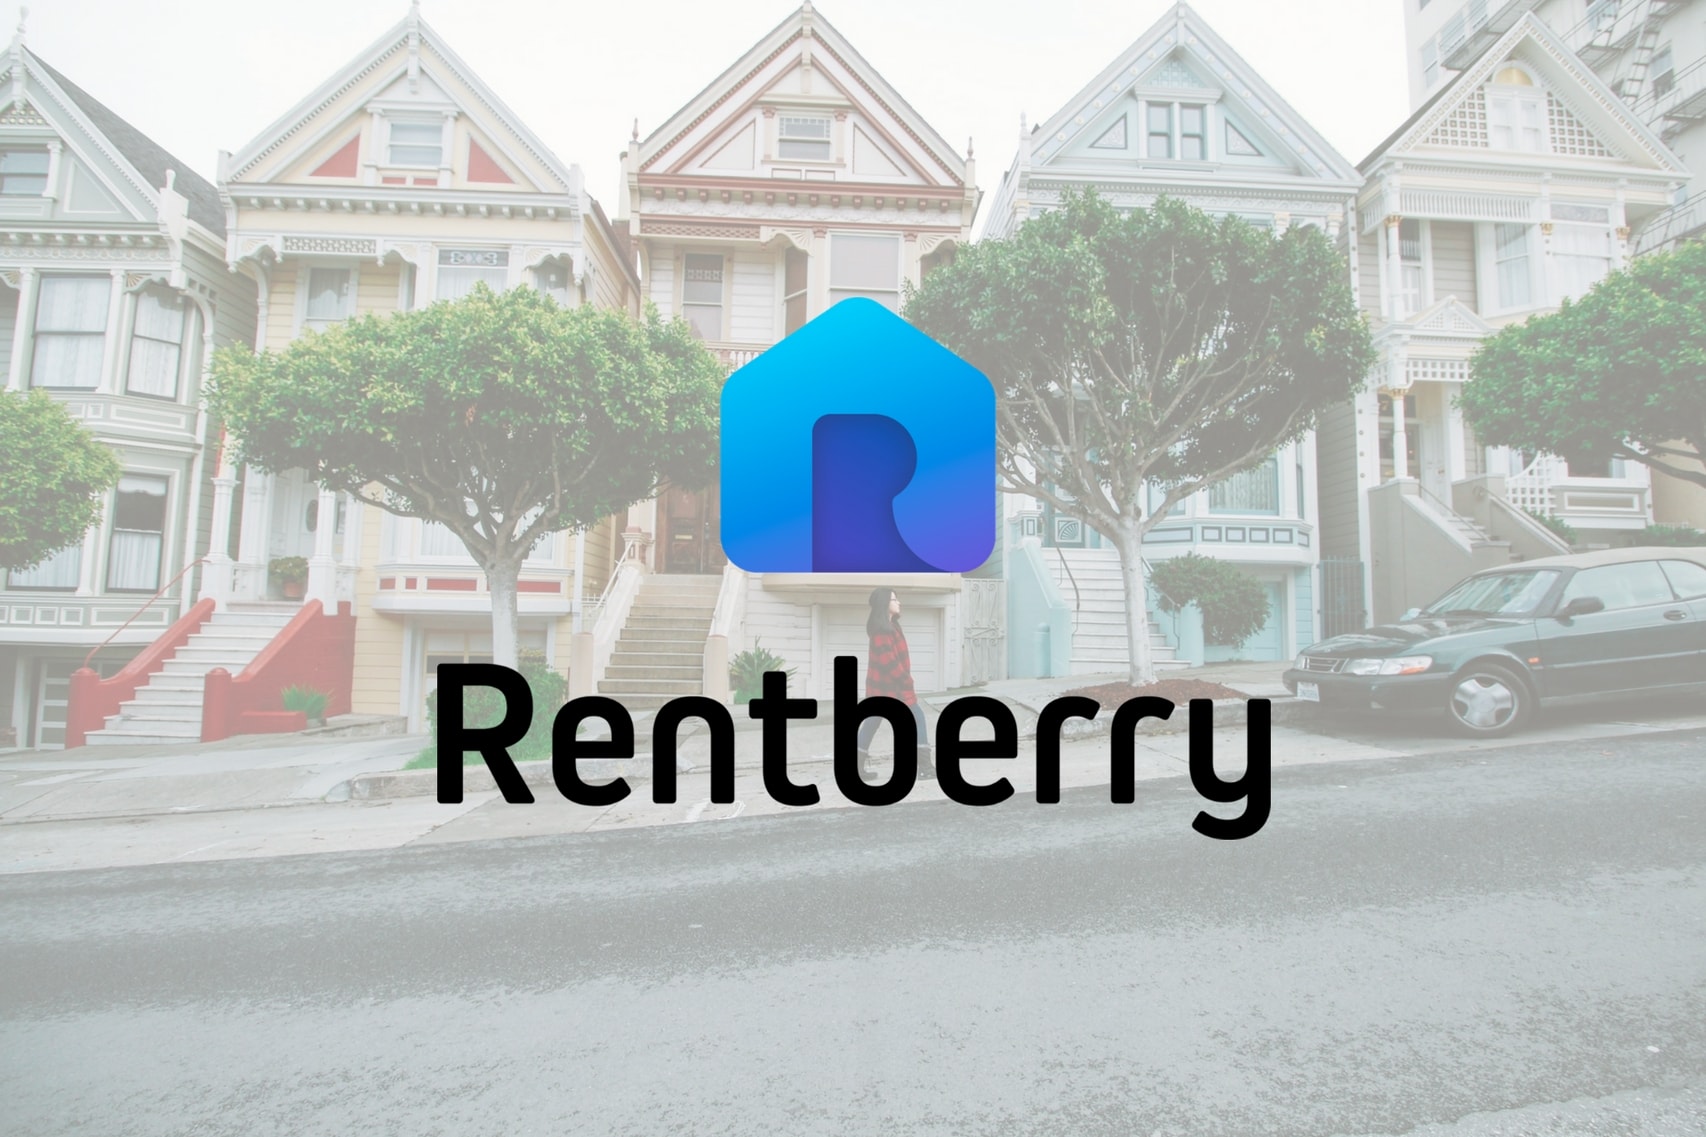 rentberry_icoresults